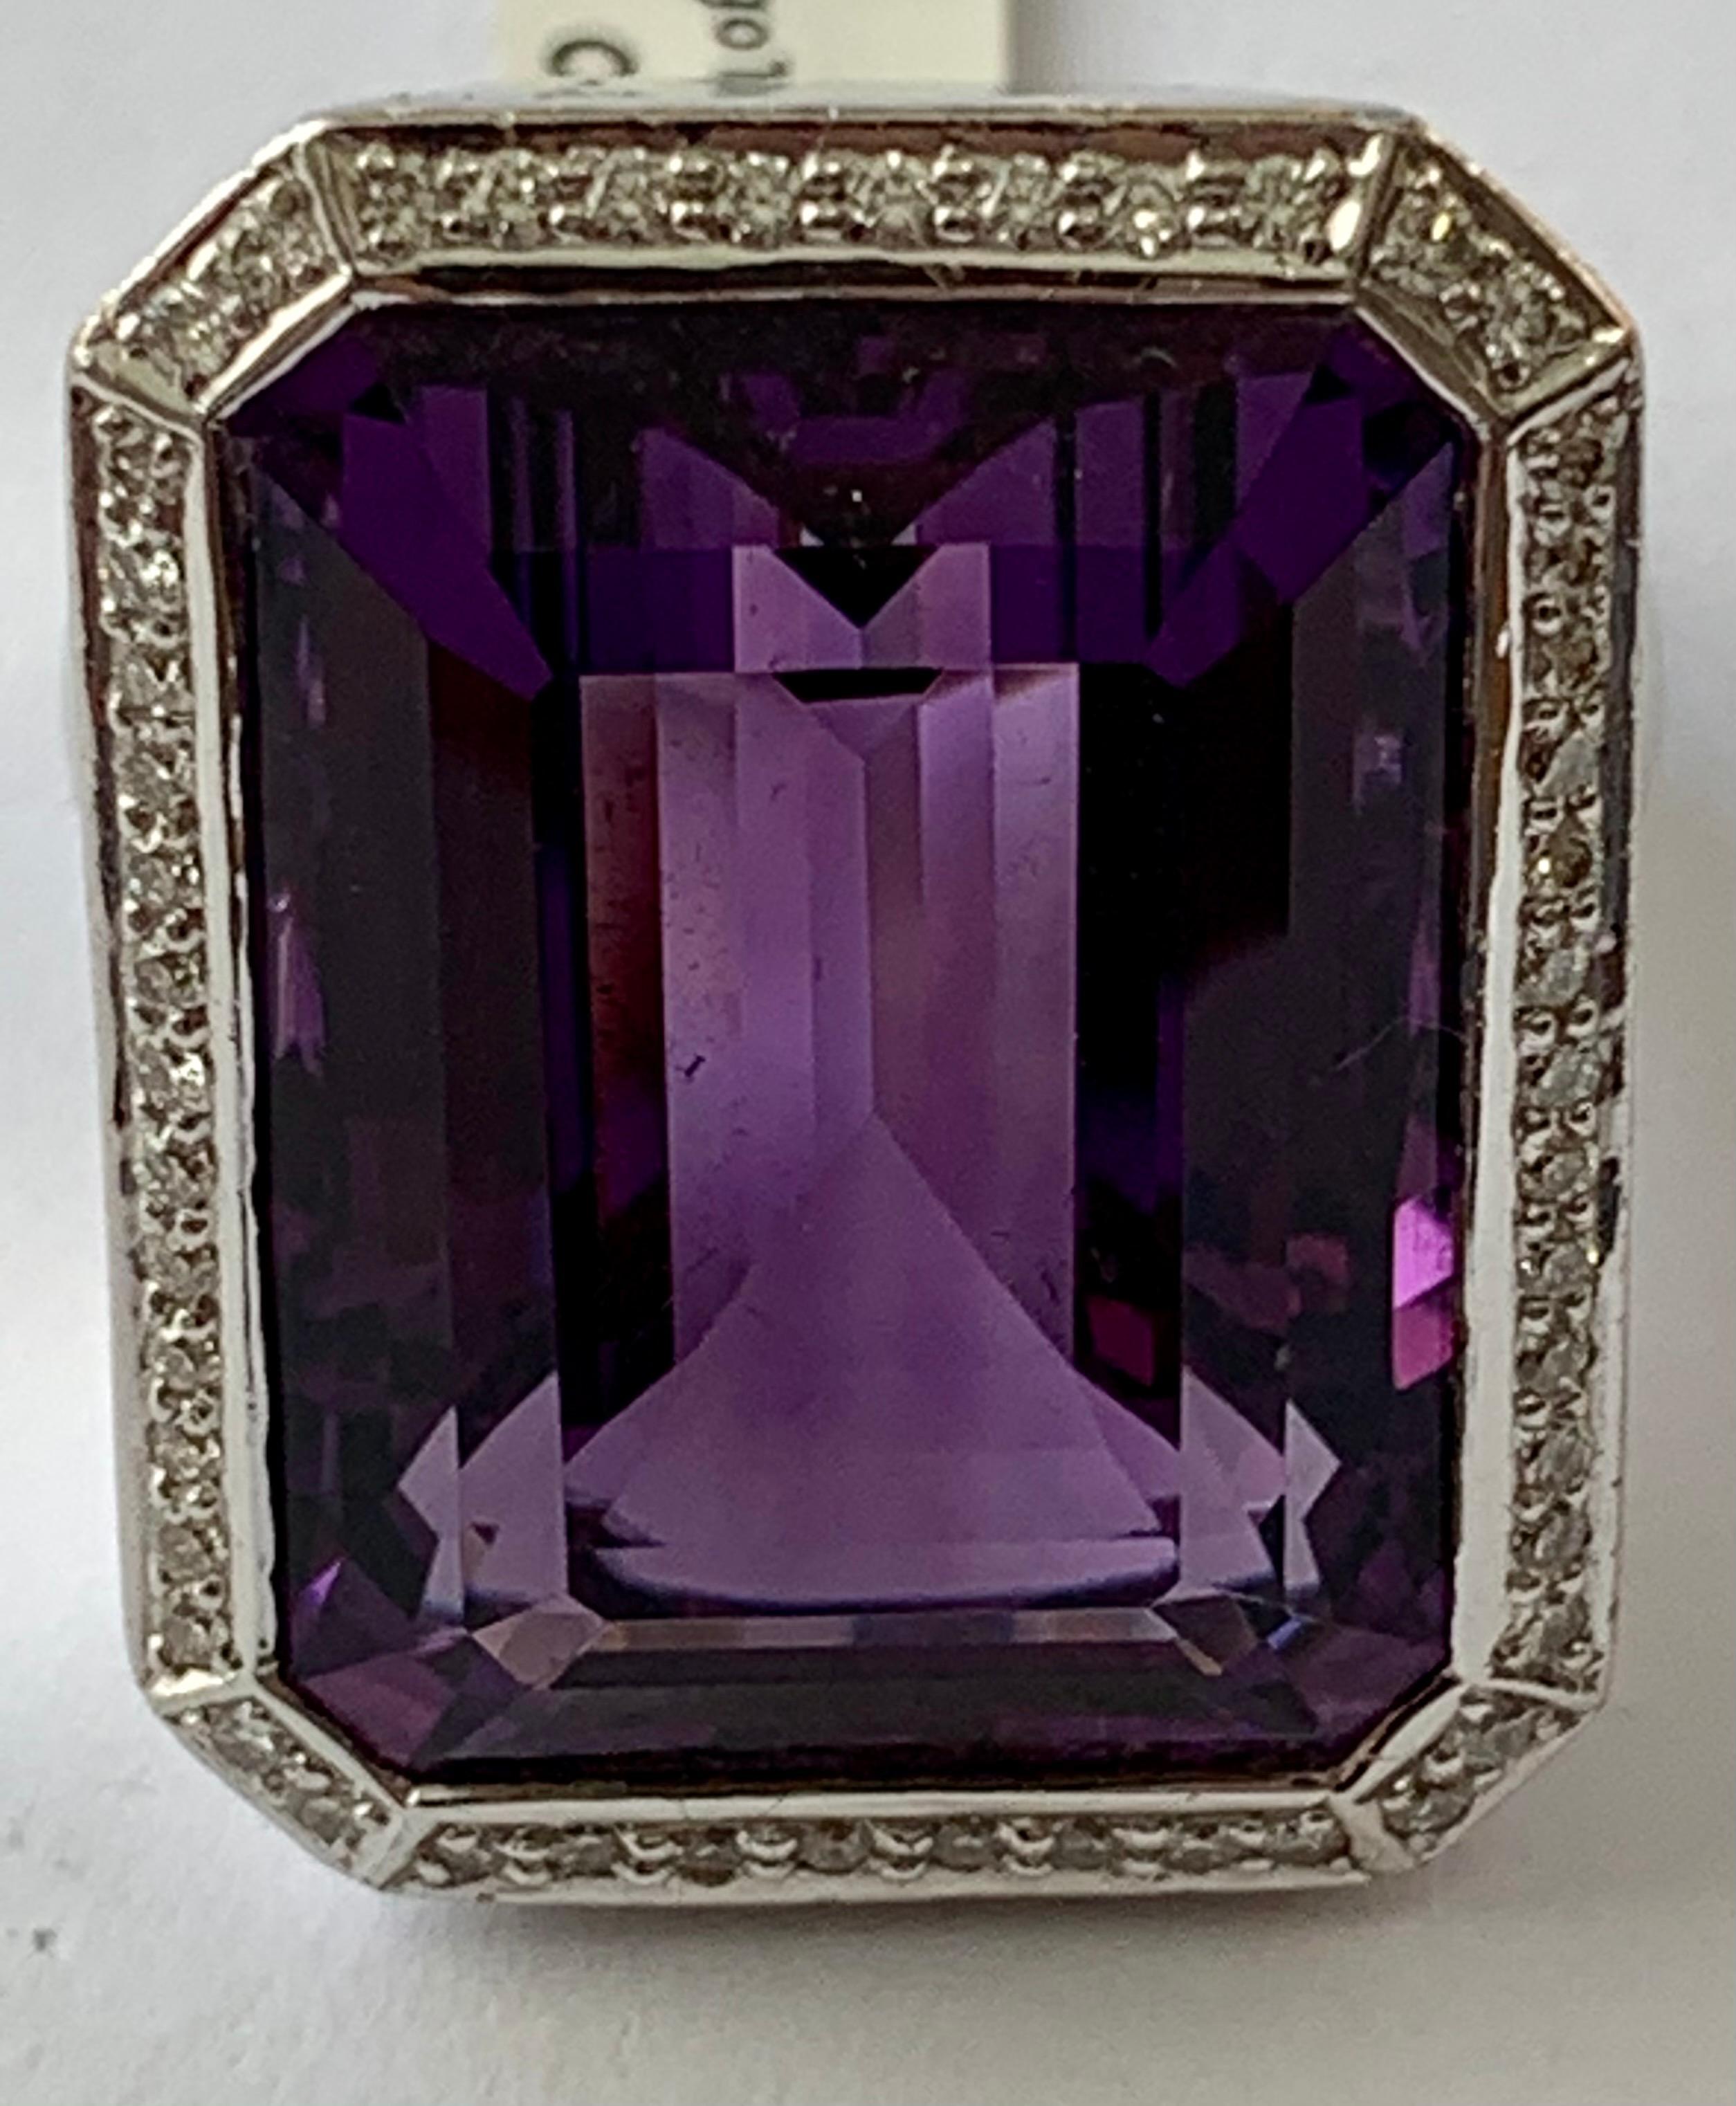 A real eye catcher this 18 K white Gold Cocktail ring. The amethyst is surrounded by small diamonds! 
Dimension of the Amethyst 2.6 cm x 2.0 cm. Very solid ring!
The ring is currently size 57 but can easily be resized!
Authenticity and money back is